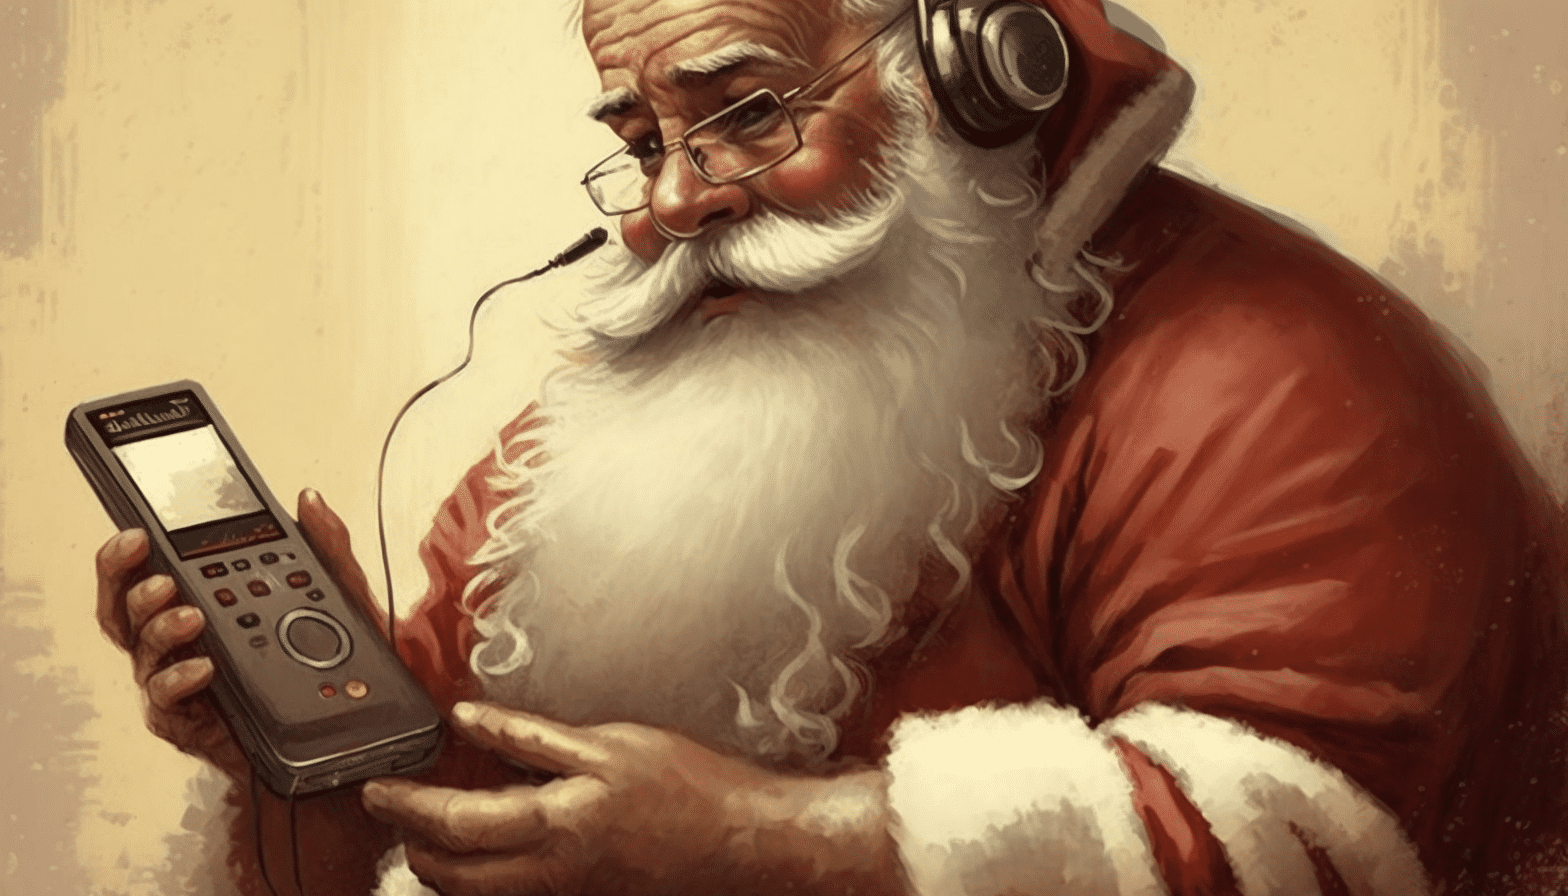 Santa listening to an mp3 player